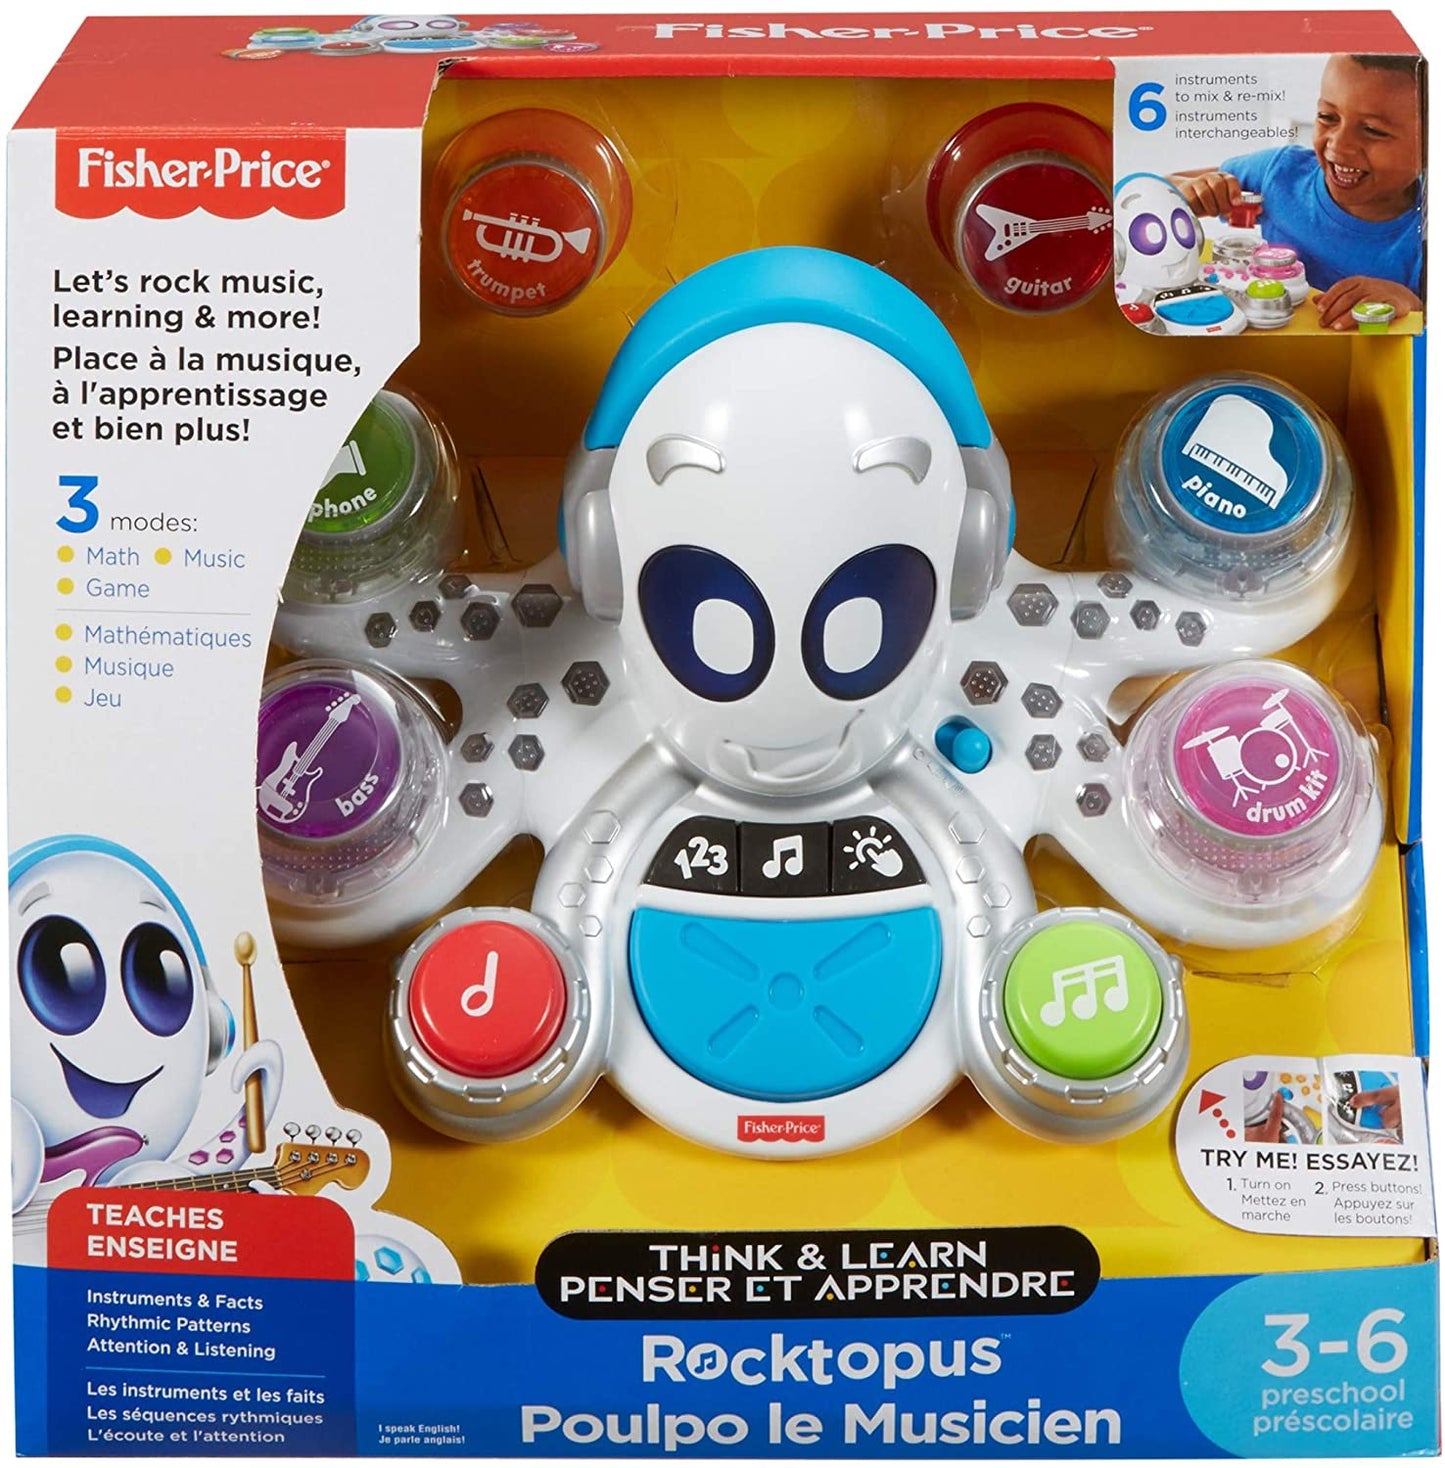 Fisher-Price - Think & Learn Rocktopus